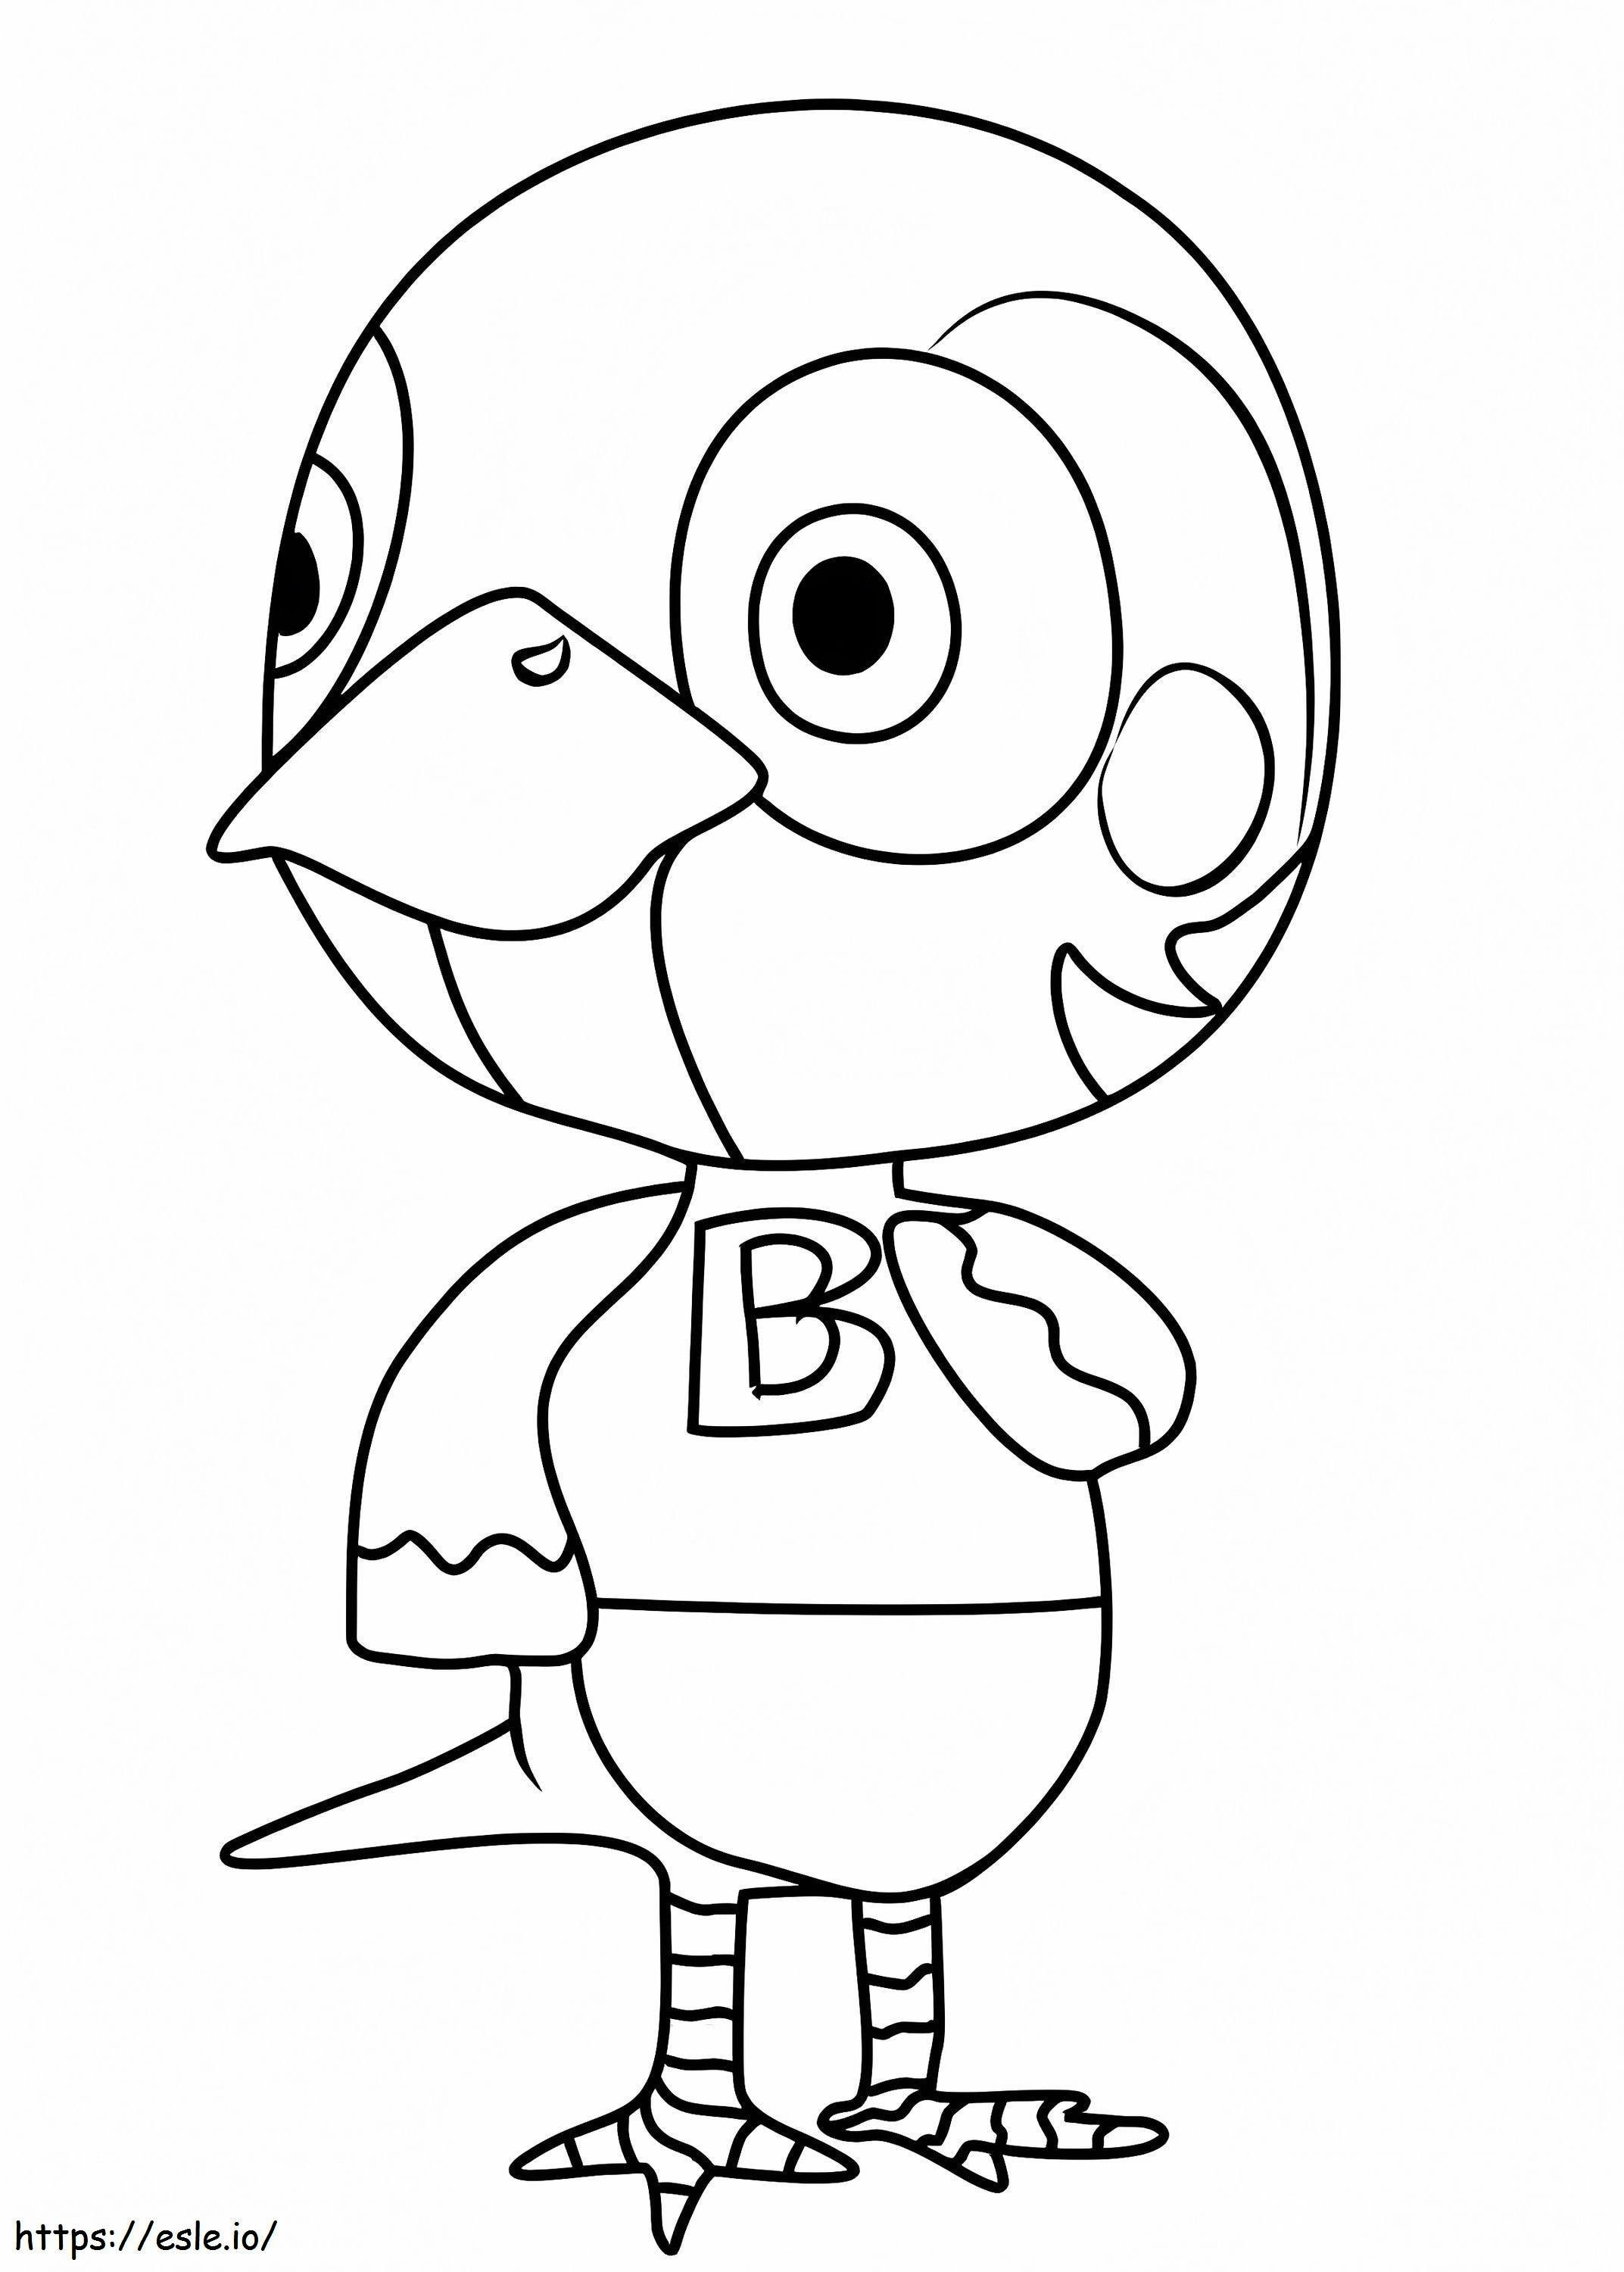 Sparro From Animal Crossing coloring page